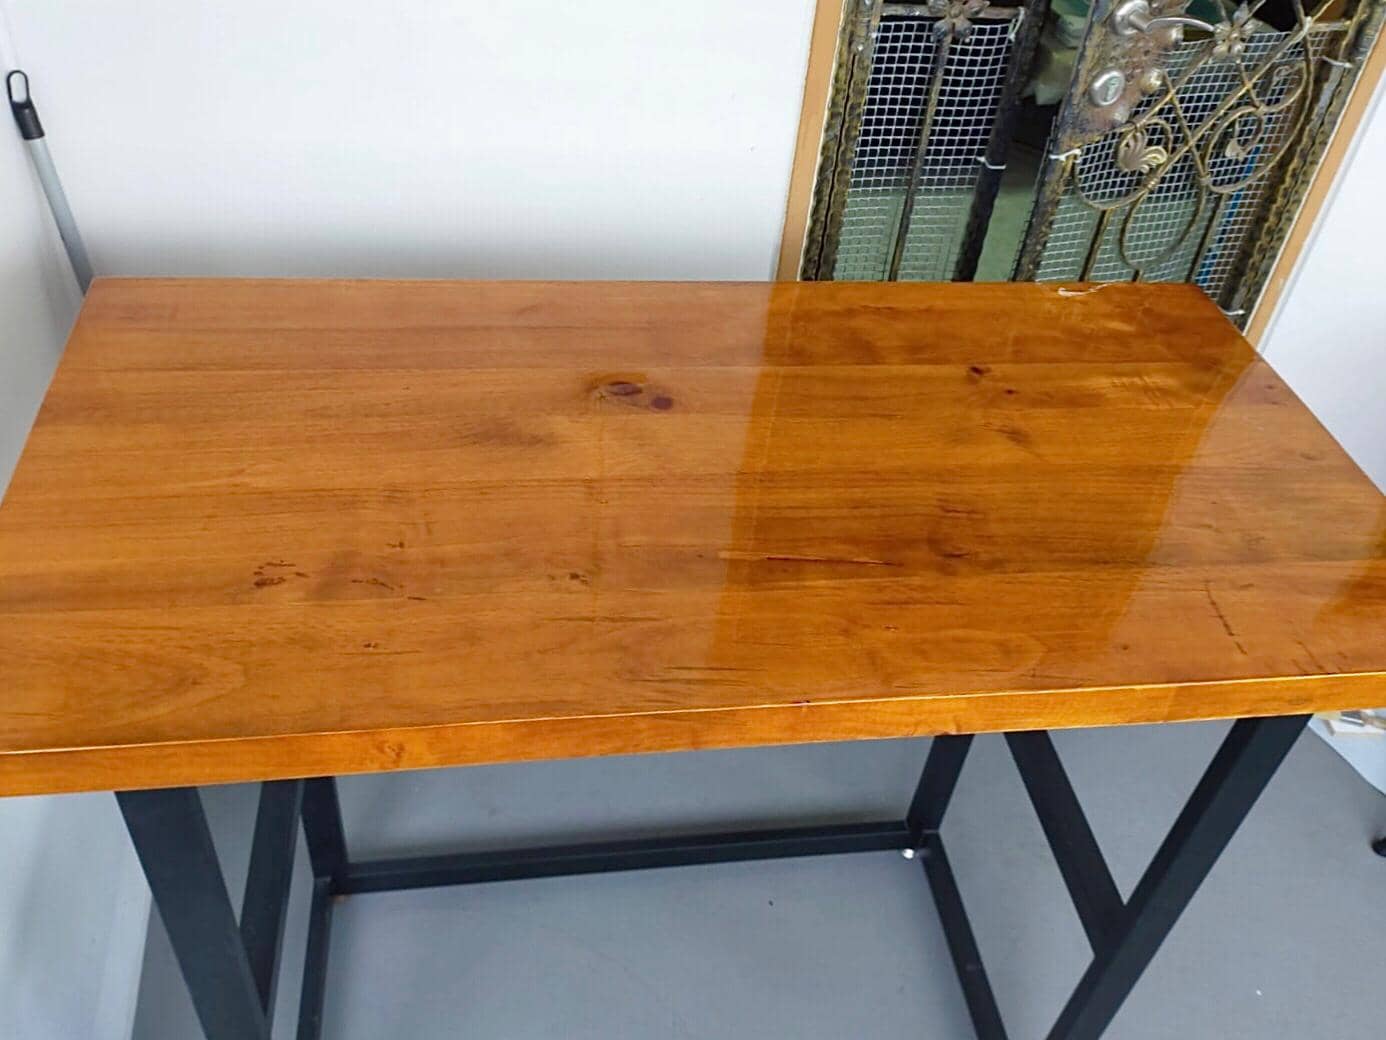 Re-varnish Table Top At Woodlands St41